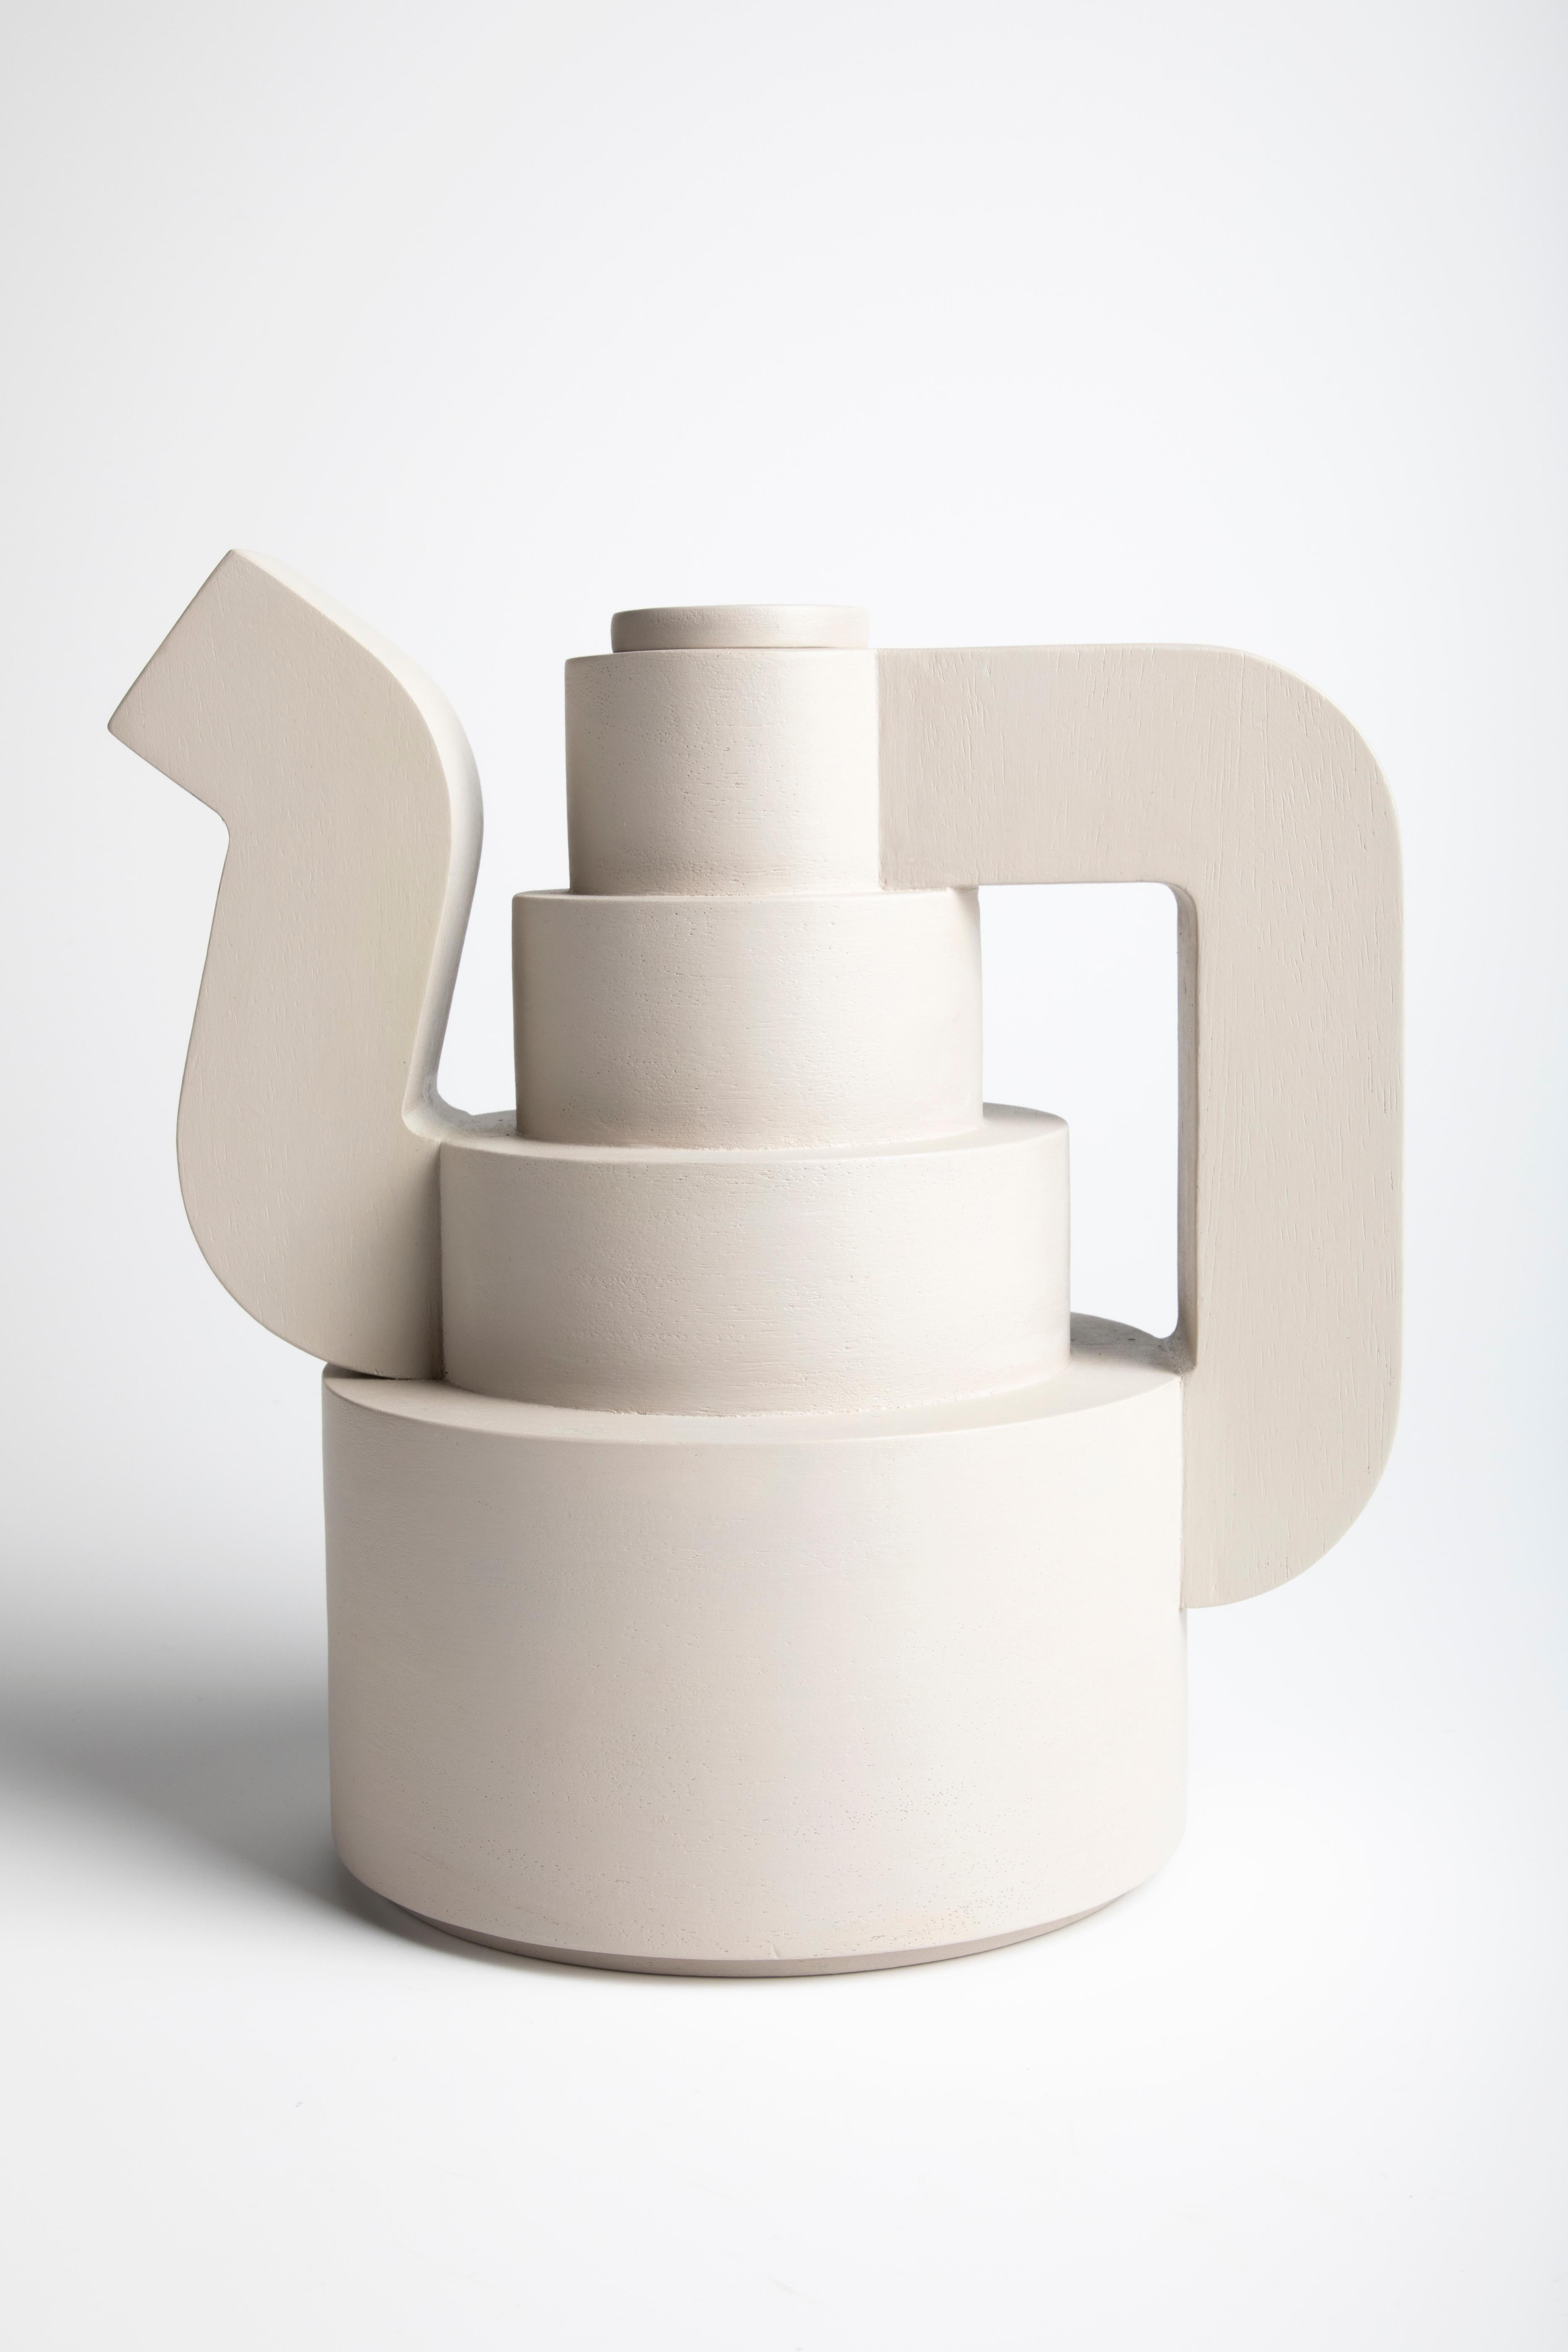 Greige Plakkenpot H coffee pot by Hanna Kooistra
Limited Edition of 100
Dimensions: 16.5 x 25 x 25.5 cm
Materials: abachi wood, food-safe and heat-resistant coating, acrylic paint
Available in other colors.

These coffee pots are a